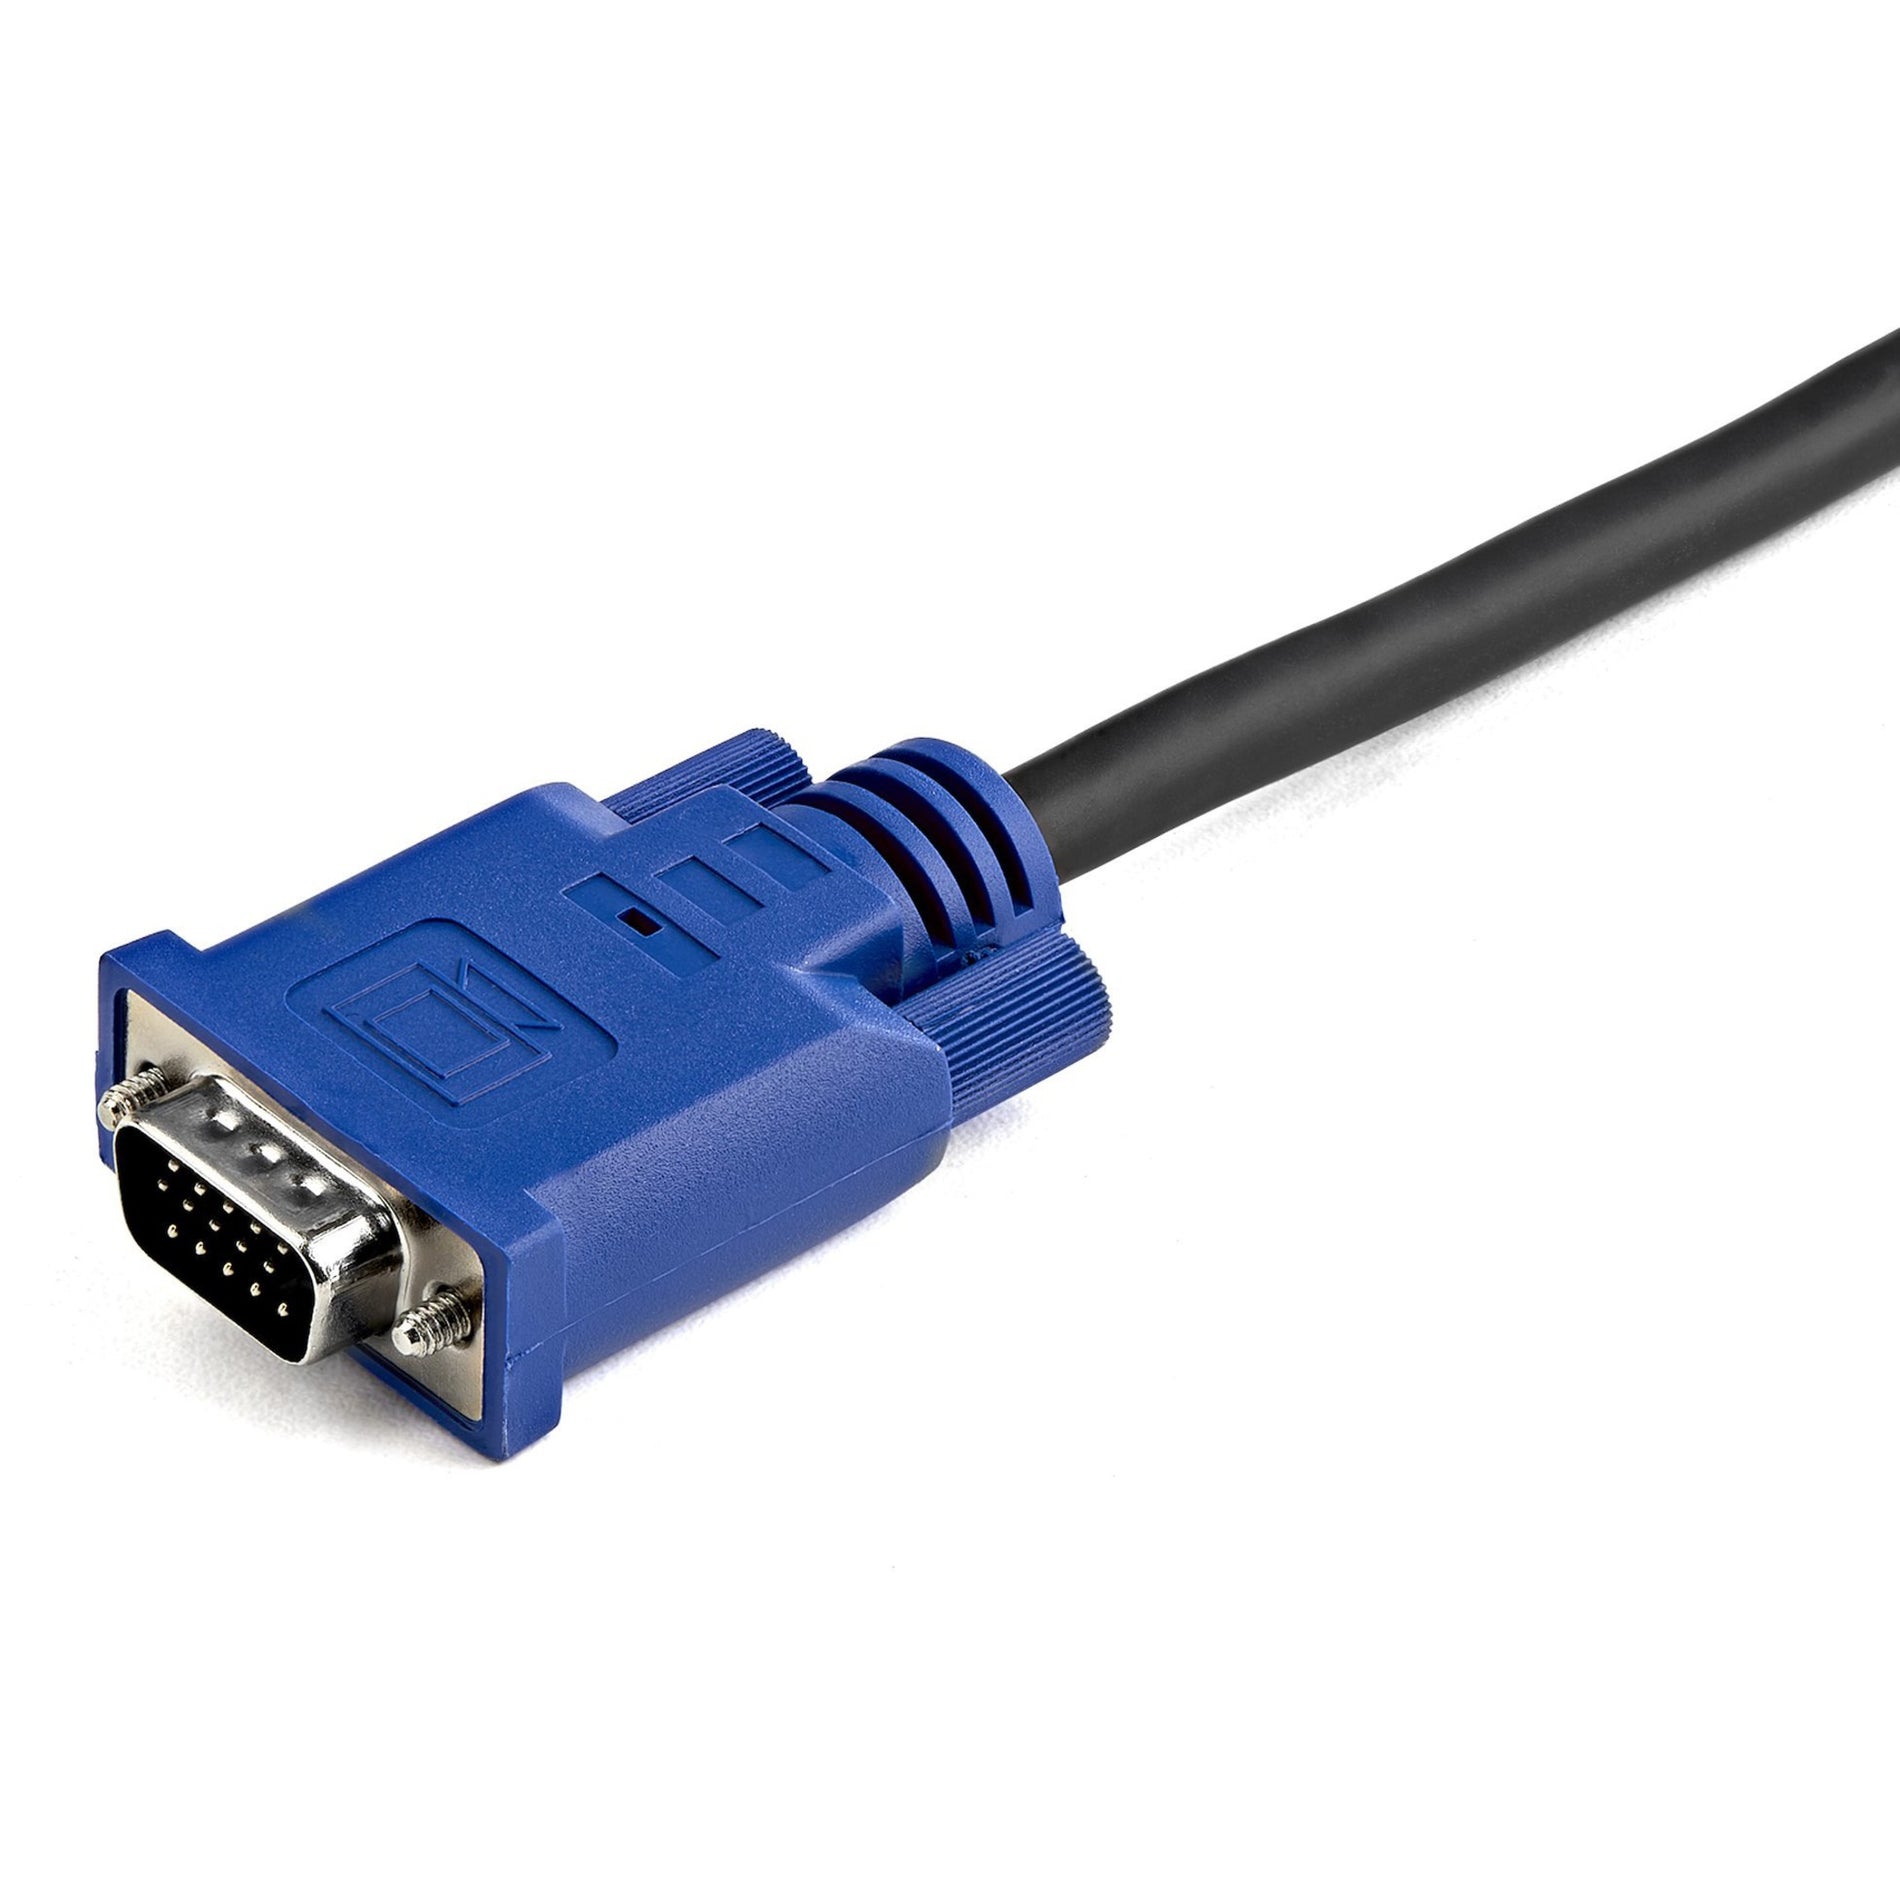 StarTech.com SVECONUS15 15 ft 2-in-1 Ultra Thin USB KVM Cable, Easy Installation, Excellent Picture Clarity